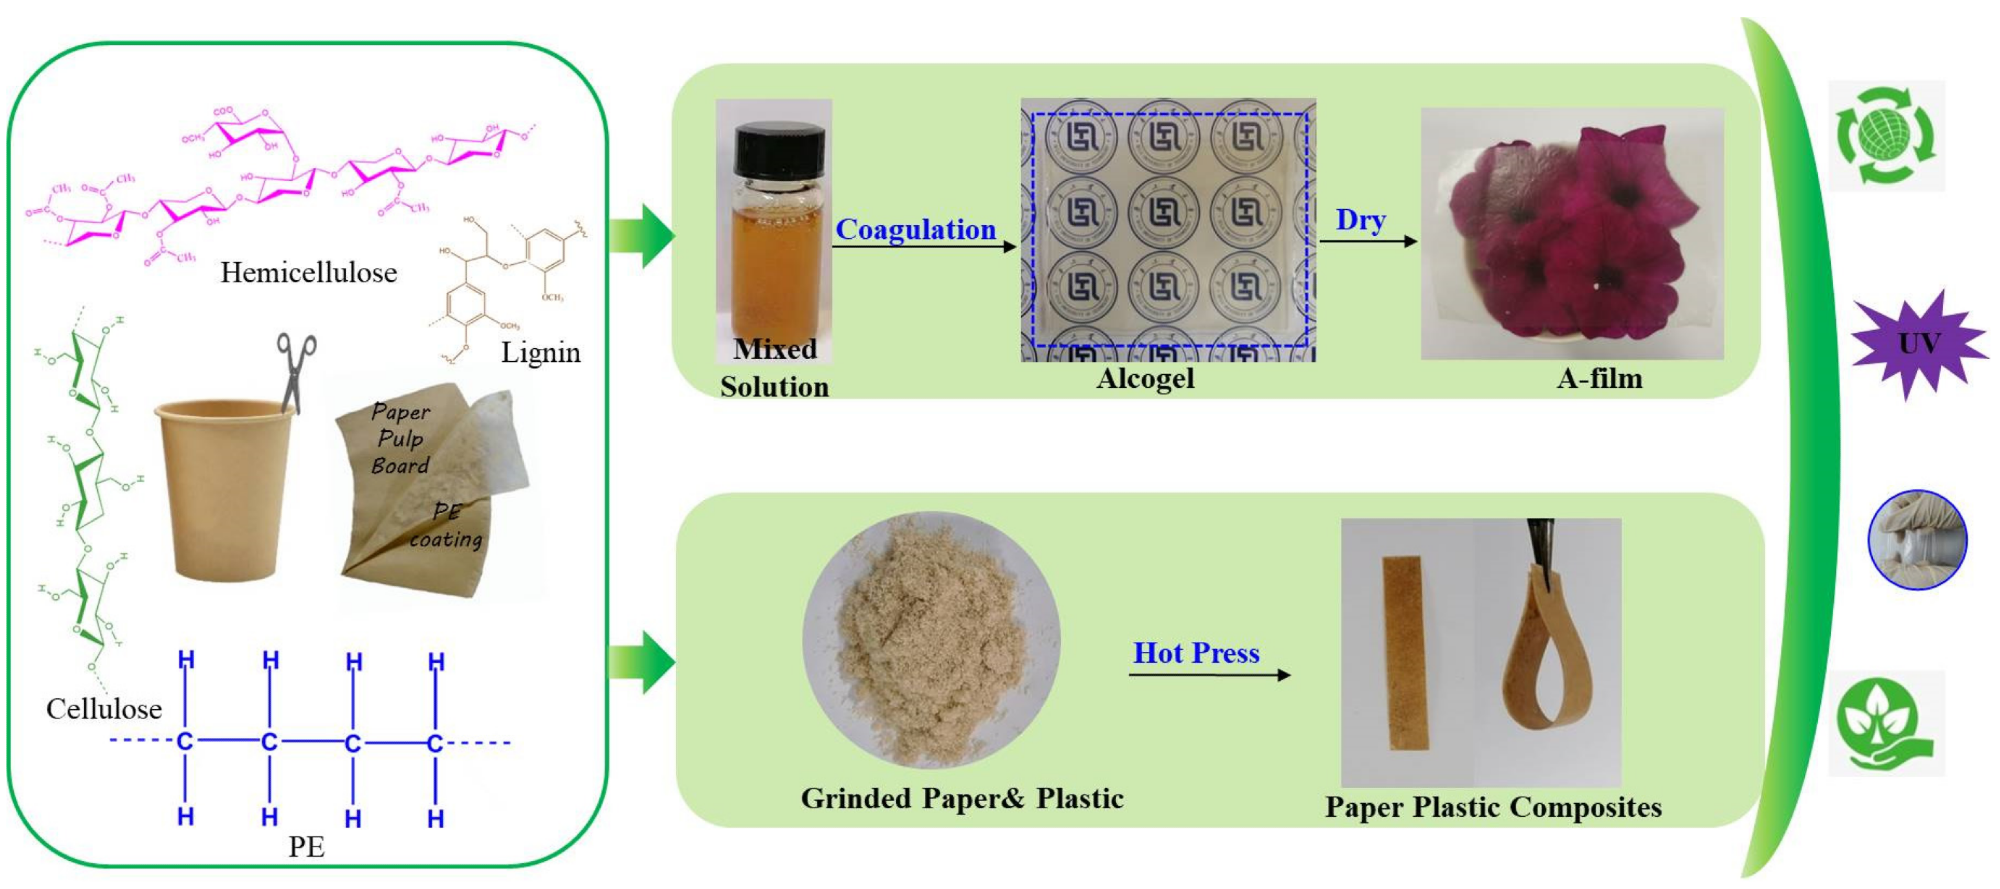 Process of converting waste disposable paper cups (WDPC) into cellulose-based films (H-film and A-film) and paper plastic composites (PPC) by AmimCl and hot press methods.